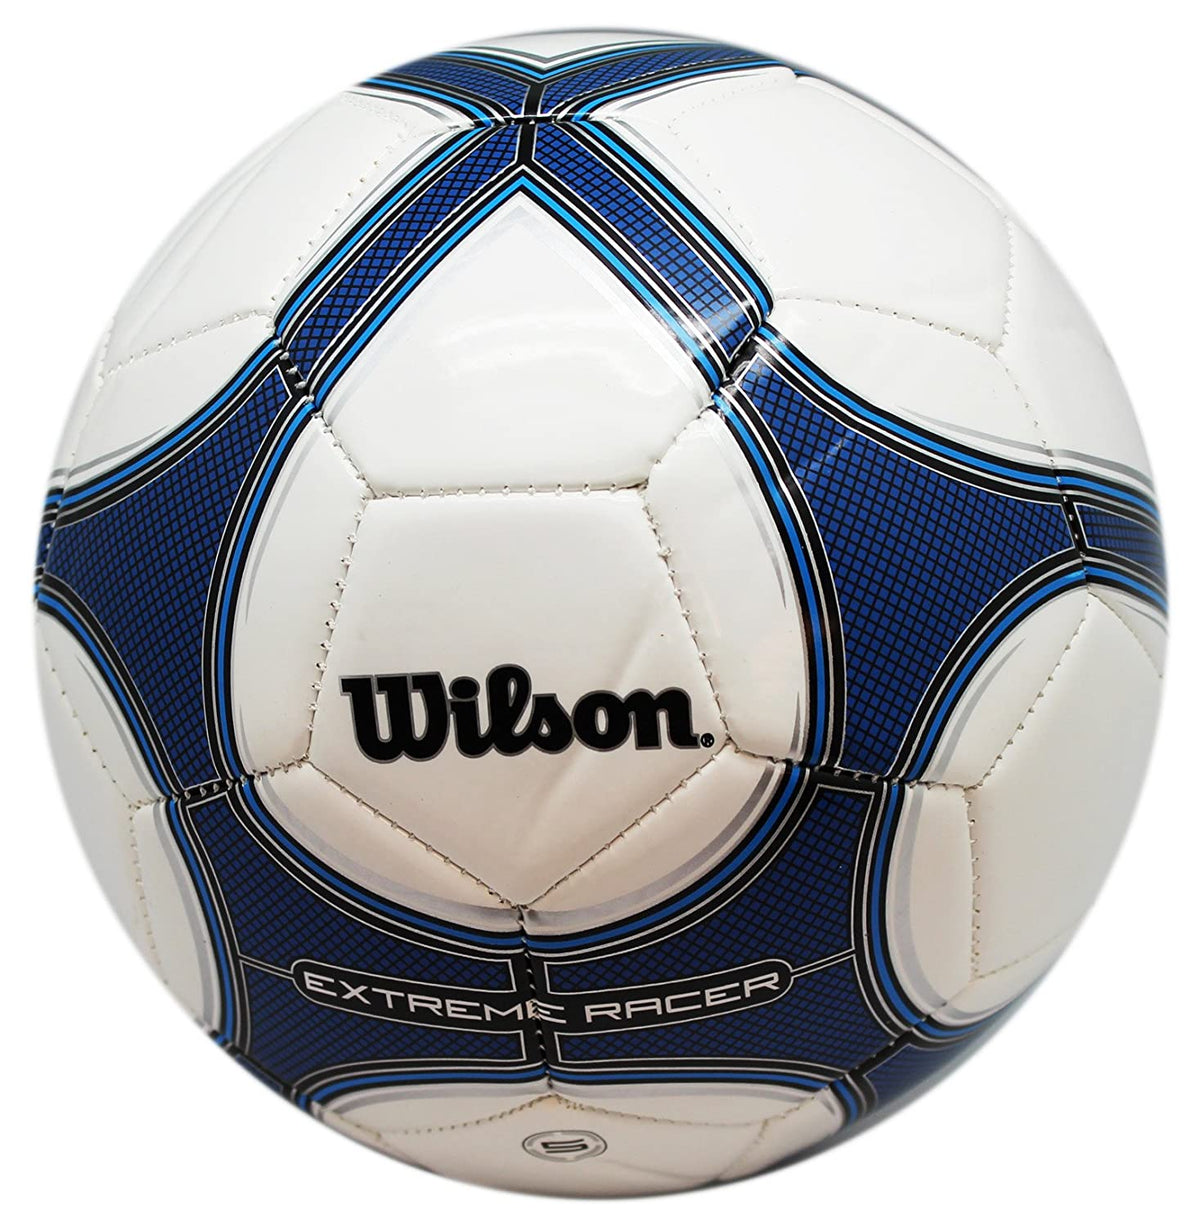 Wilson Extreme Ii Soccer Ball Size 5